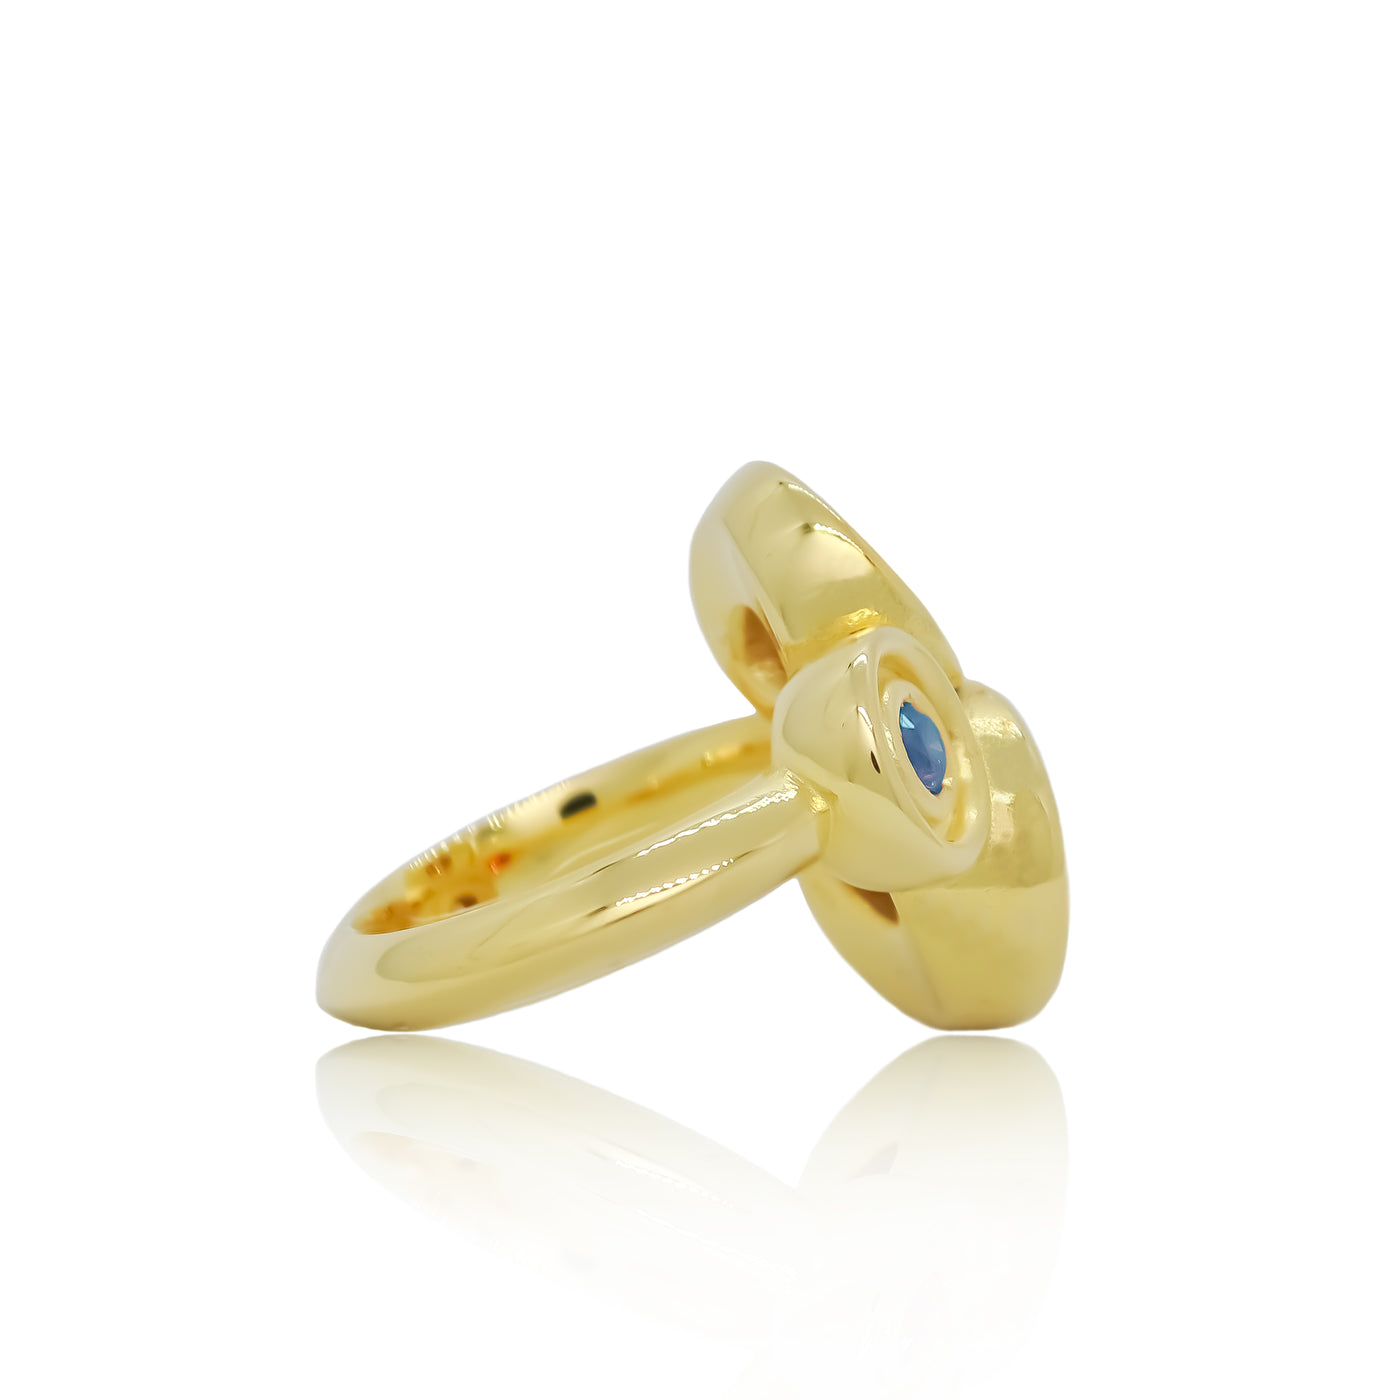 Gold Cocktail ring with aquamarine and topaz from Atelier ORMAN